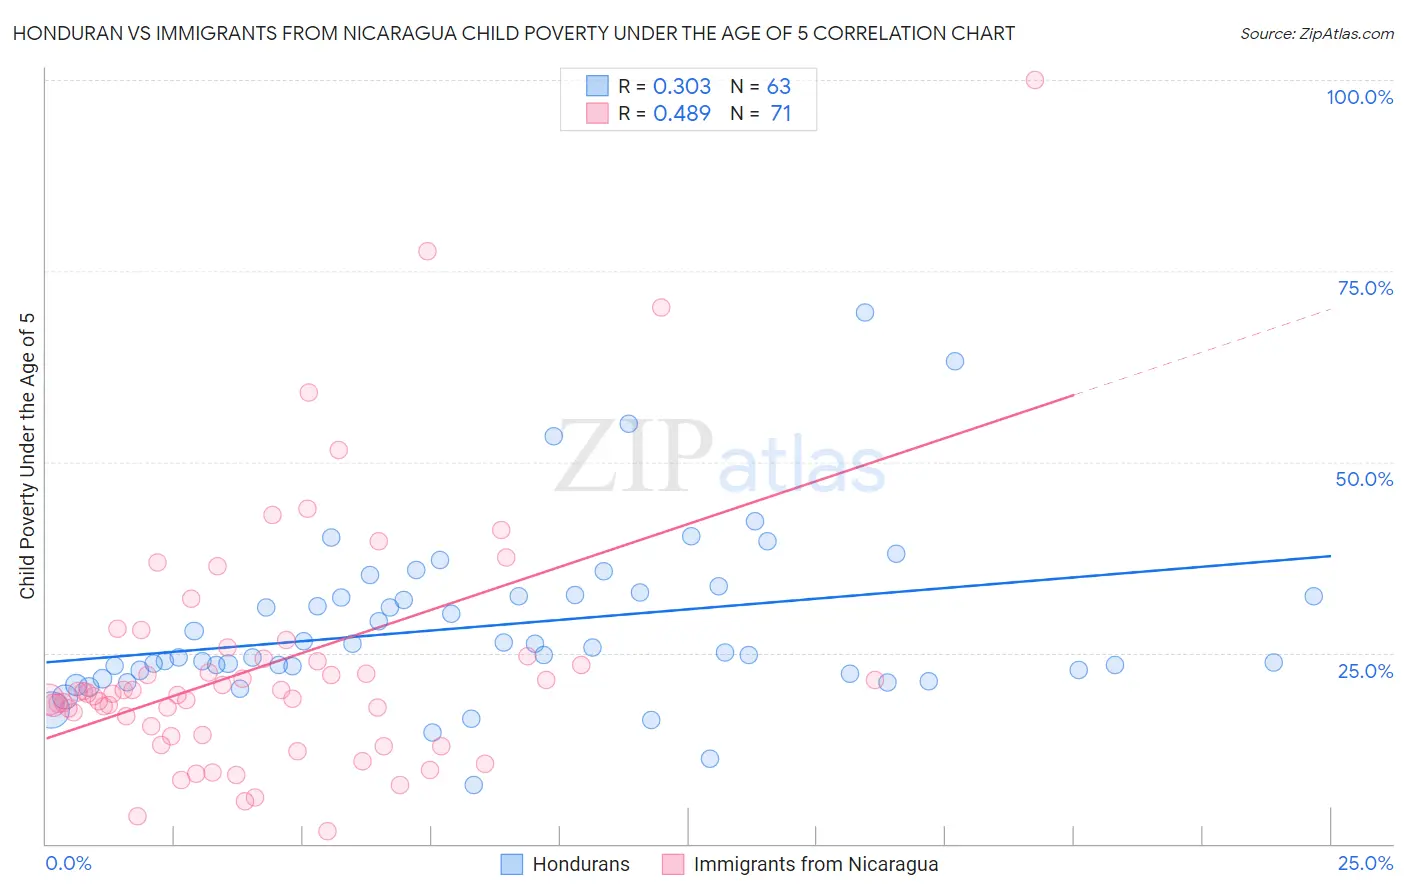 Honduran vs Immigrants from Nicaragua Child Poverty Under the Age of 5